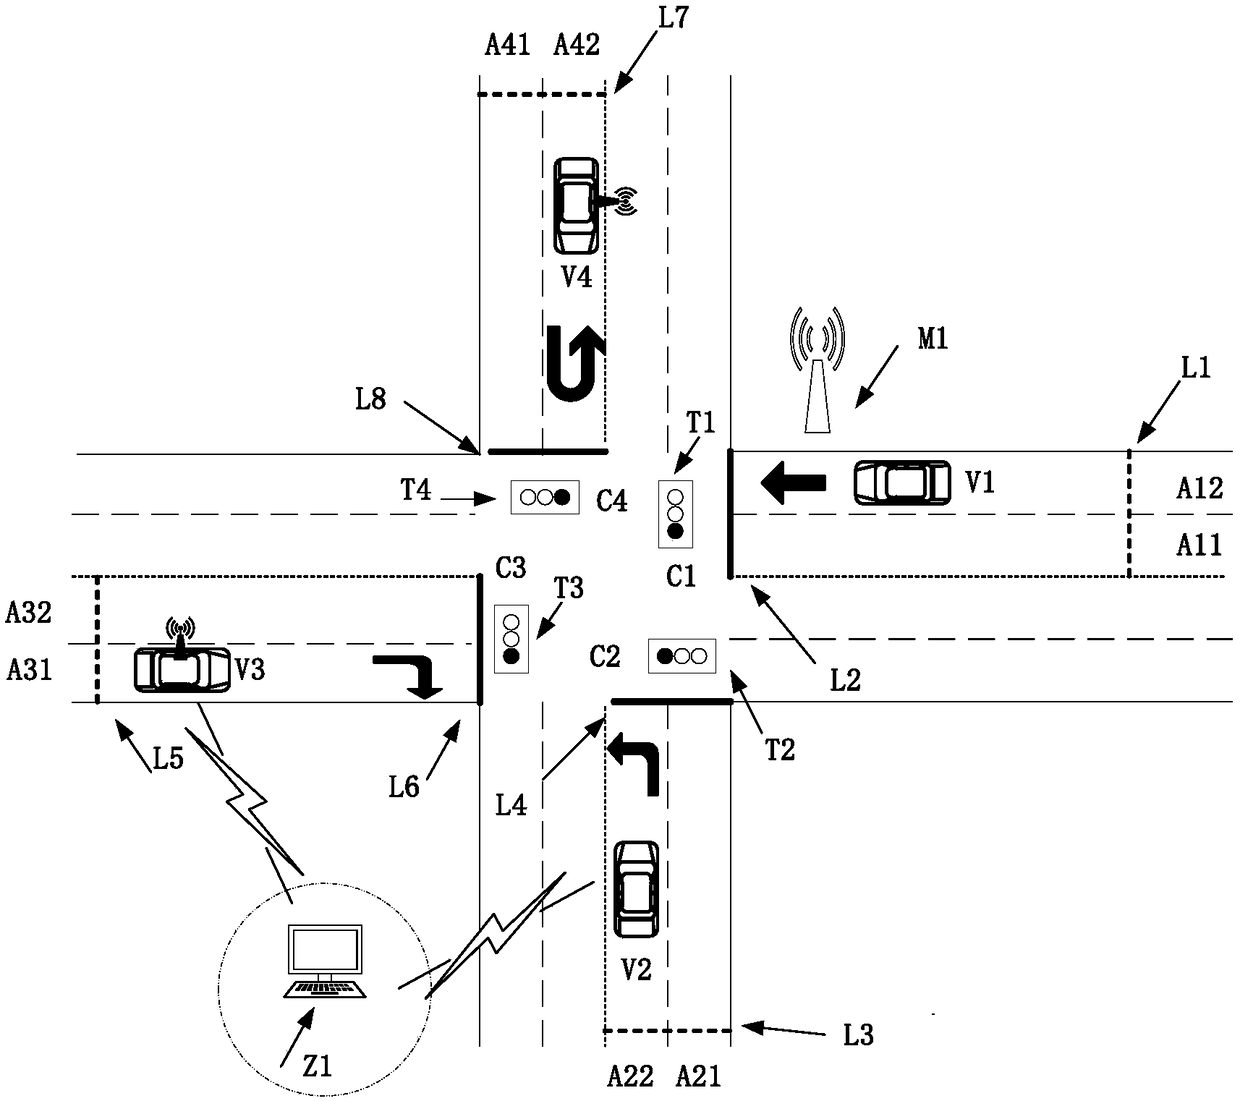 An unmanned vehicle traffic light automatic perception capability test system and test method